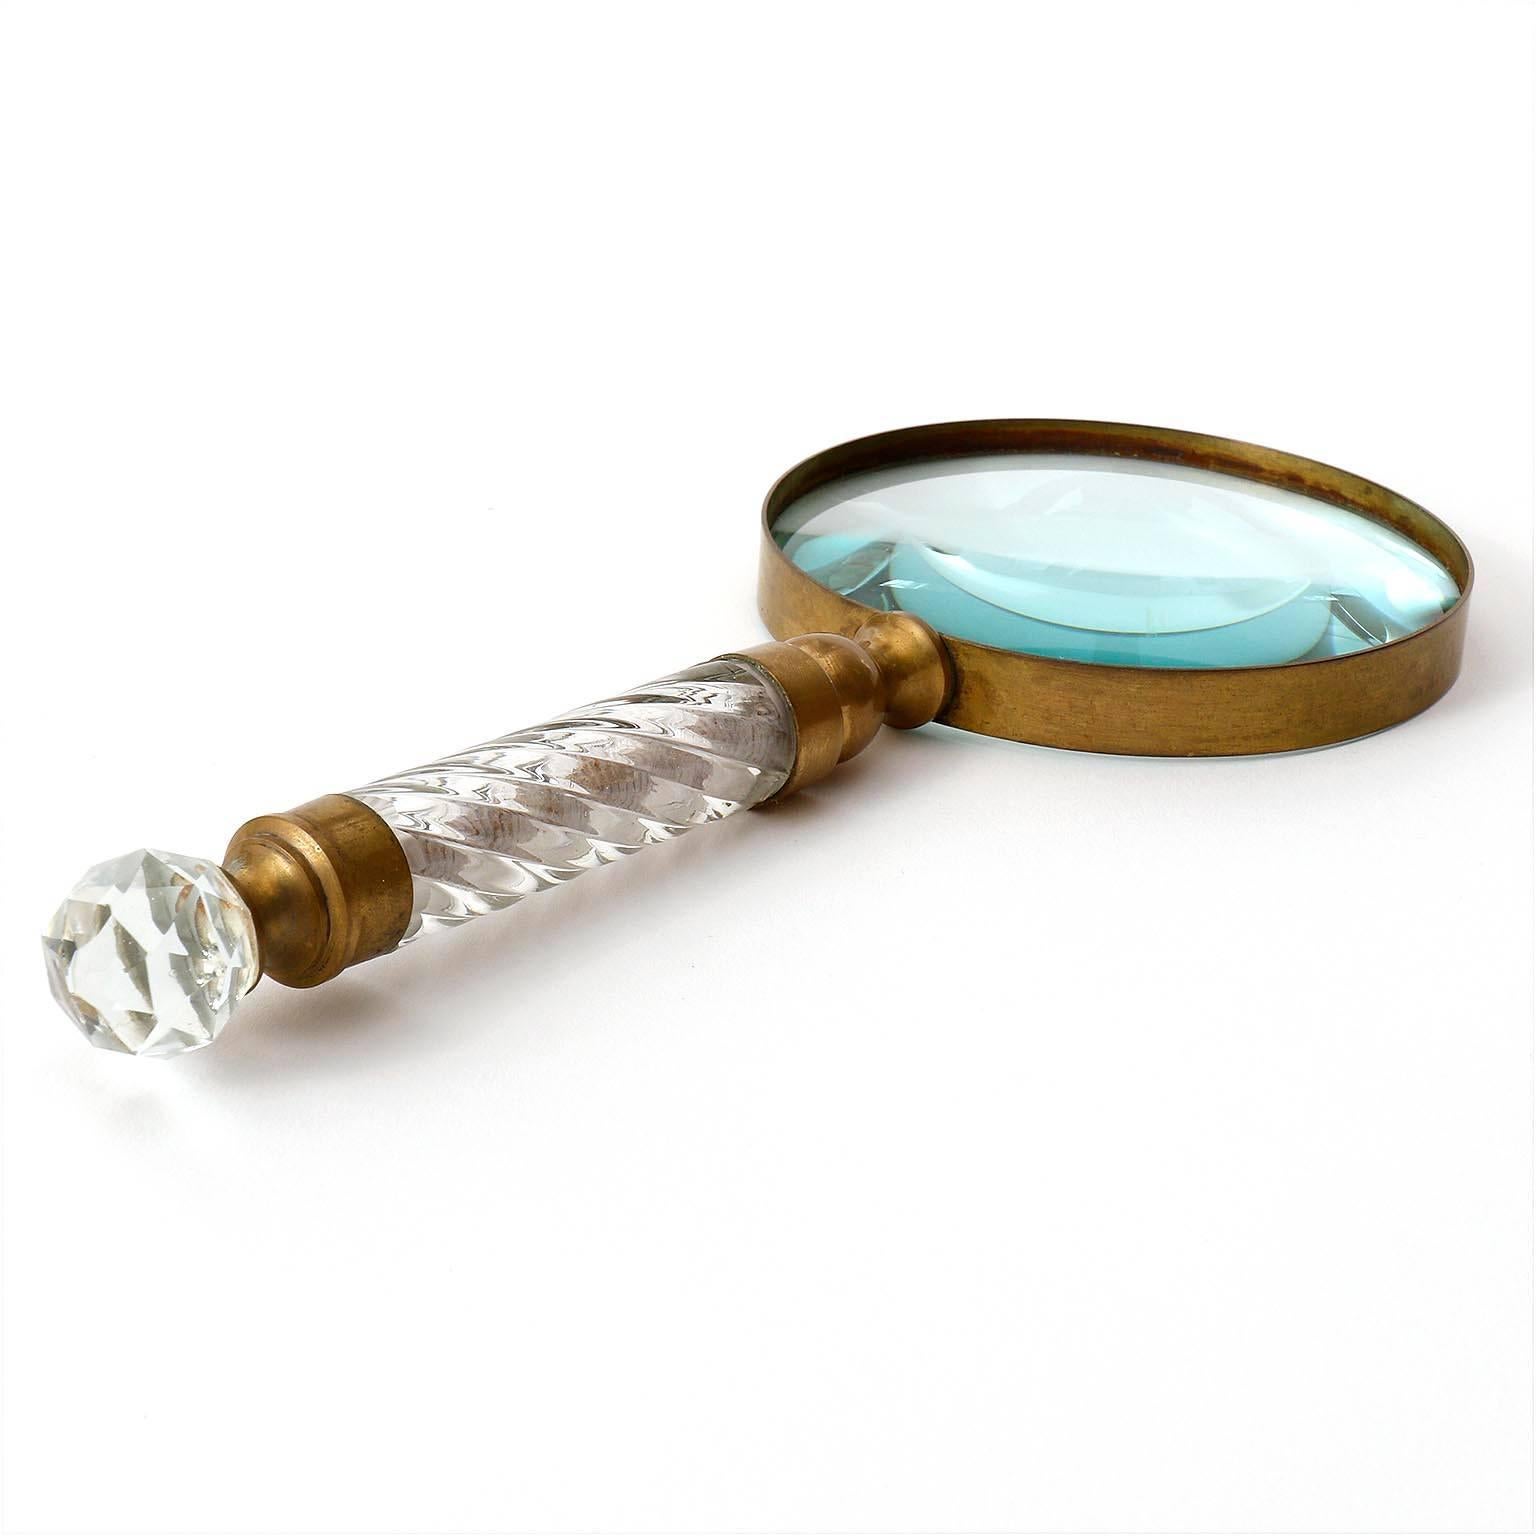 A magnifying glass made of brass and crystal glass.
Very nice patina on brass.